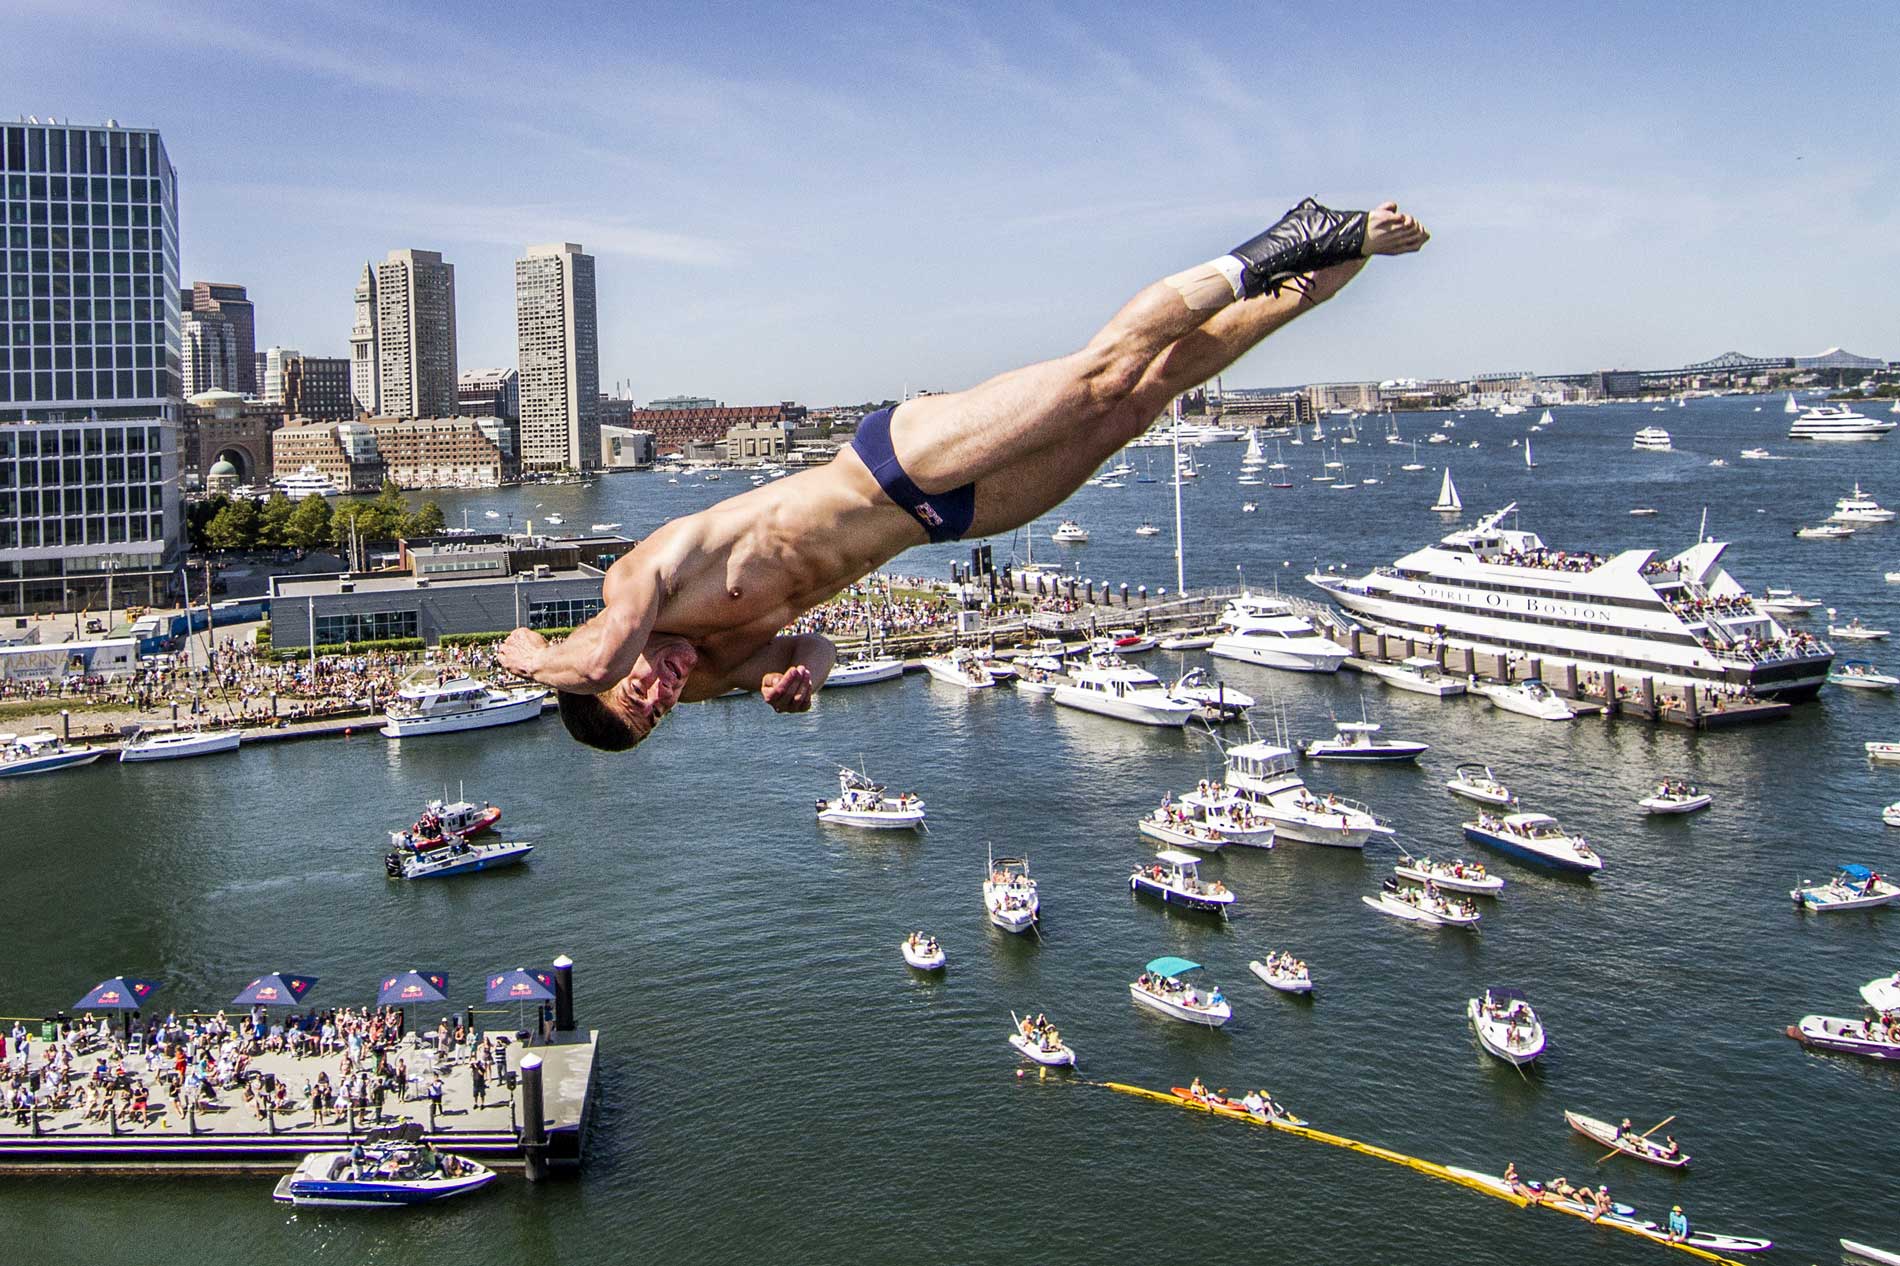 Red Bull Cliff Diving Hangman Productions